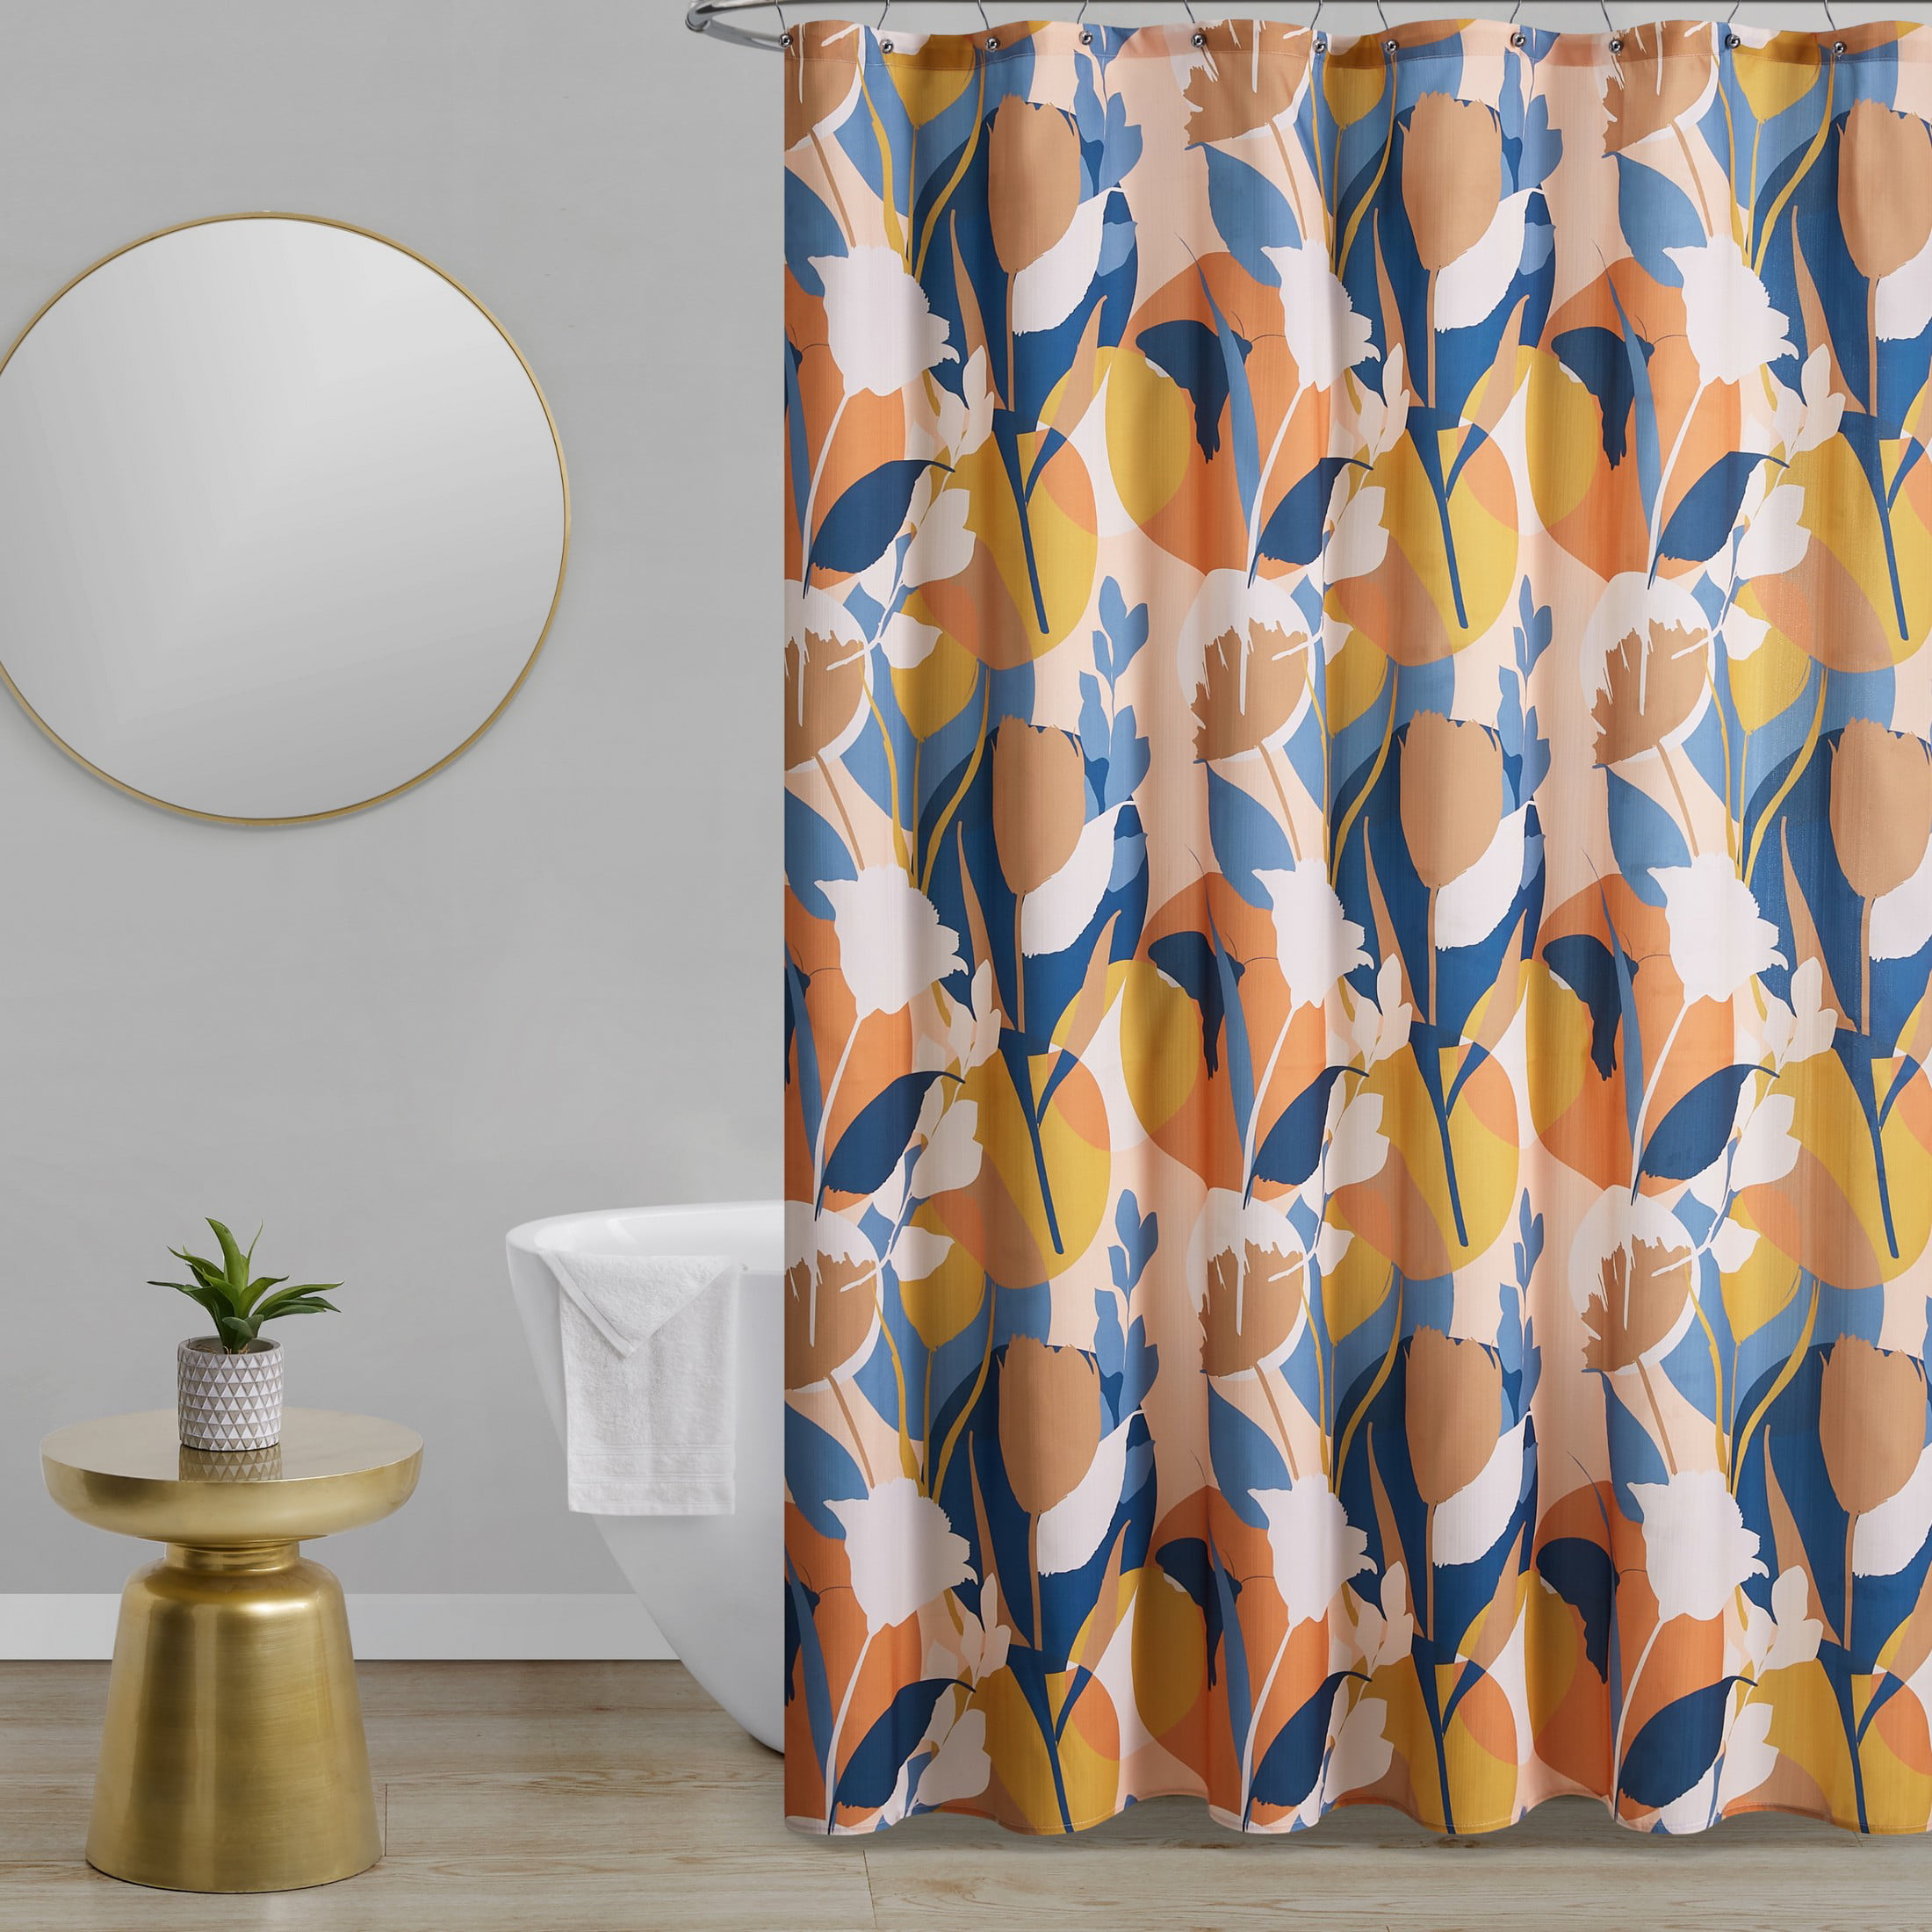 Details about   SHOWER CURTAIN DOVE GRAY OFF WHITE Buffalo Check Fabric Wicklow Park Designs 